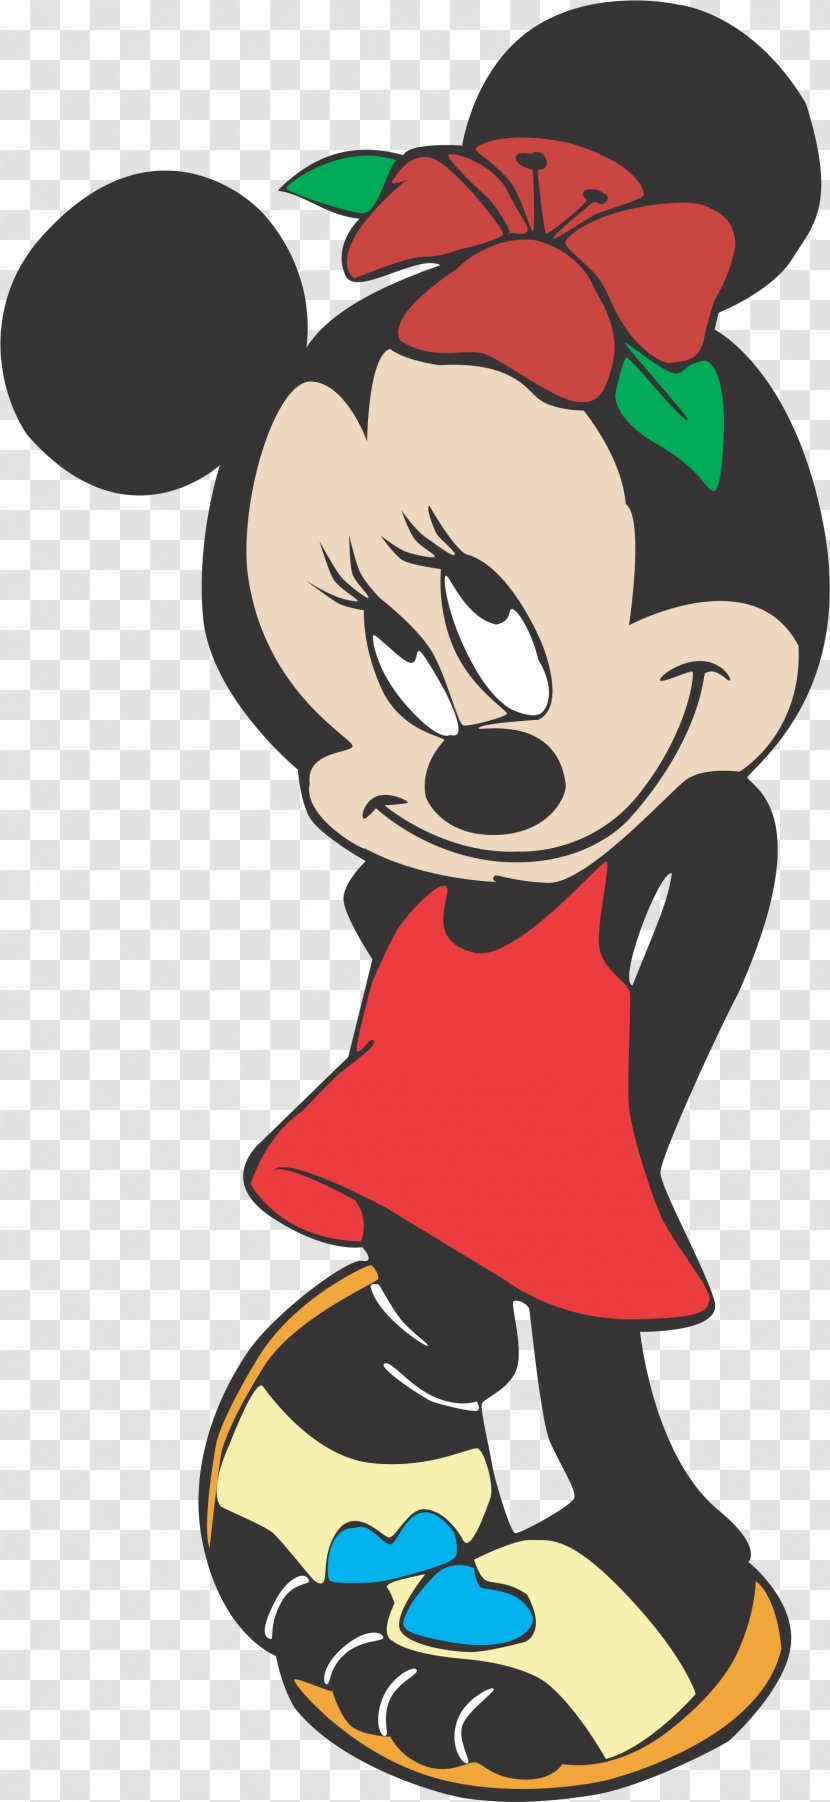 Minnie Mouse Mickey Donald Duck The Walt Disney Company - Pluto Transparent PNG